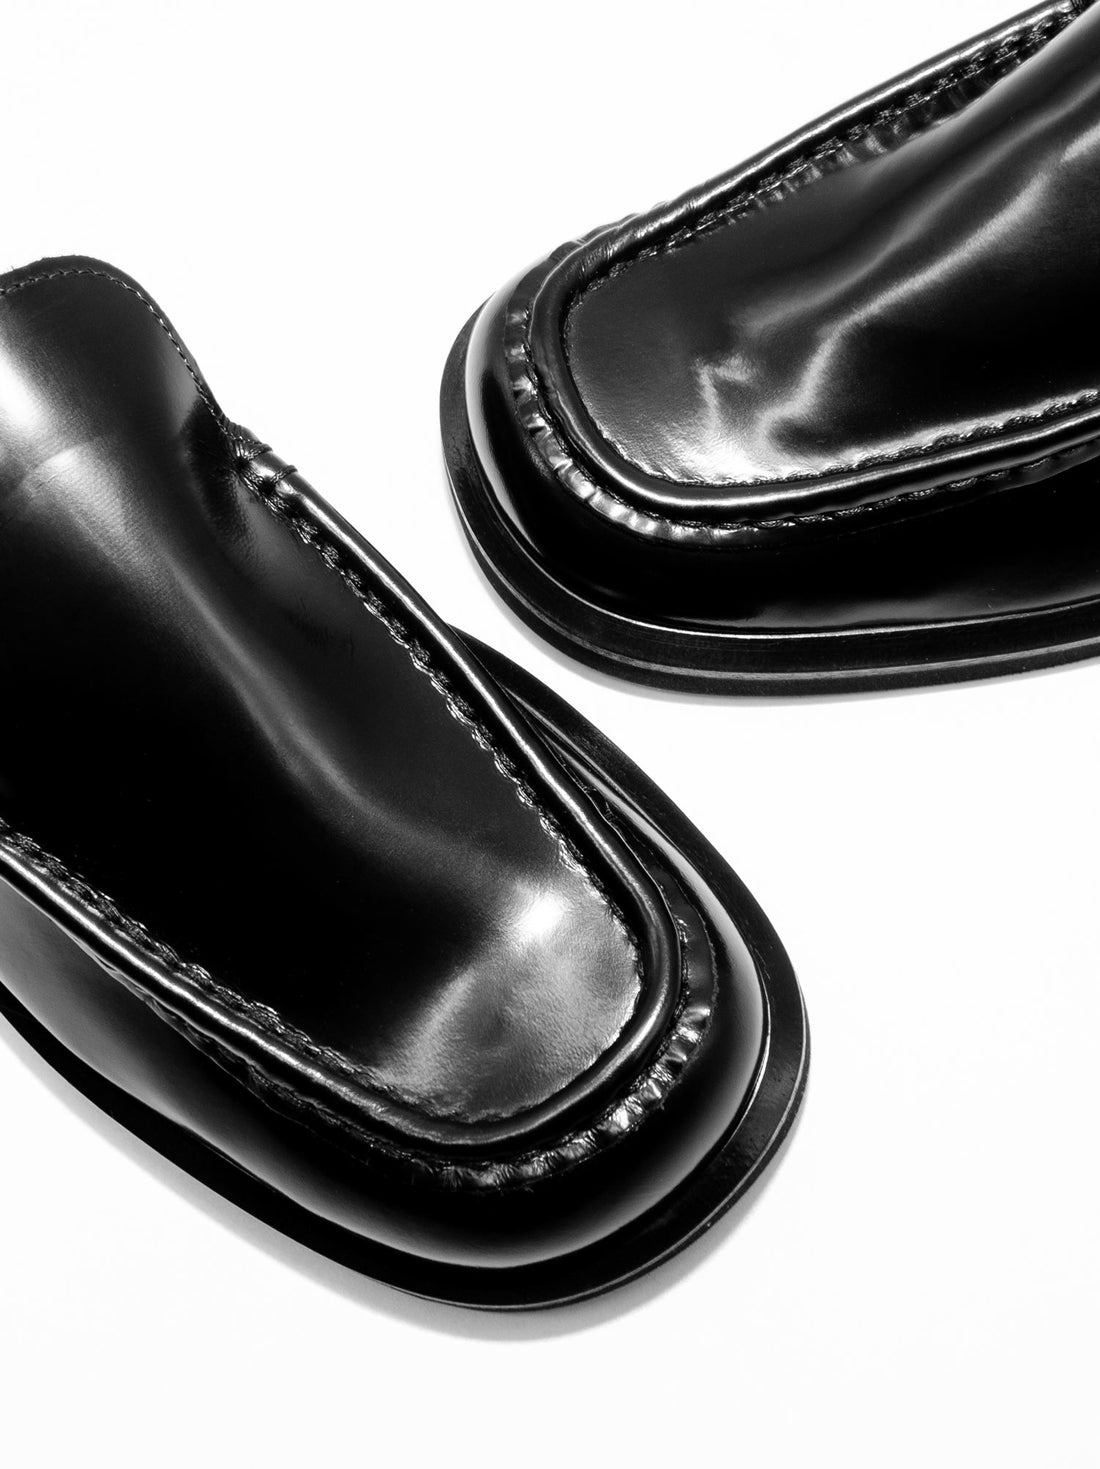 JMA35 BRUSHED LEATHER LOAFERS